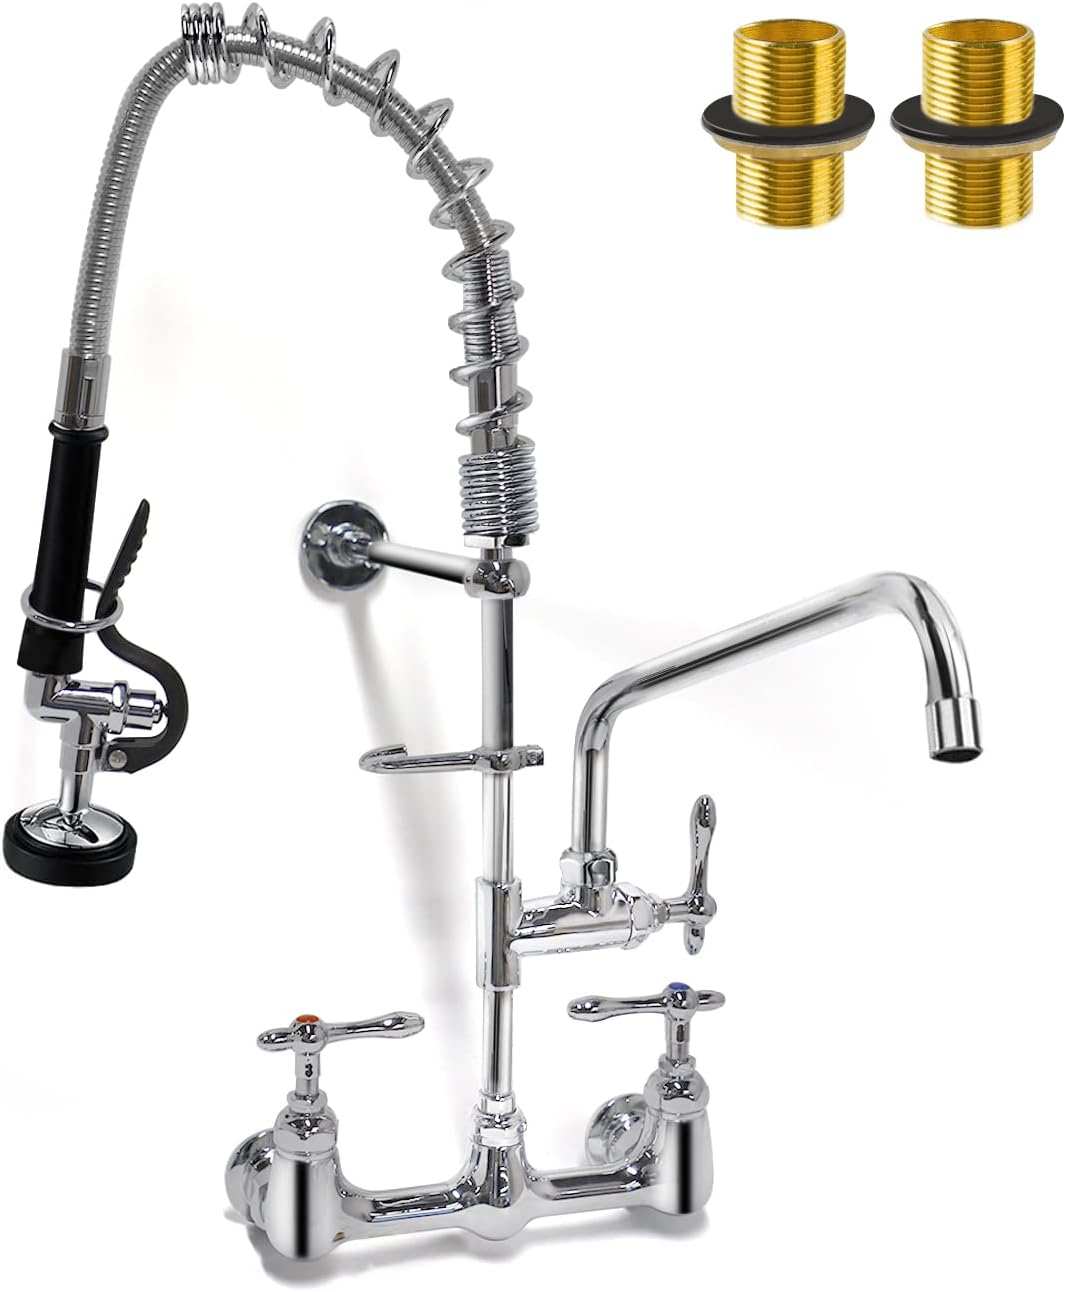 MYWHITENG Commercial Faucet with Sprayer, 8 Adjustable Center Wall Mounted Restaurant Faucets,8' Spout andPull-Down Pre-Rinse Faucet 25 Height Suitable for 1, 2 or 3 Compartment Sinks (Solid Bras